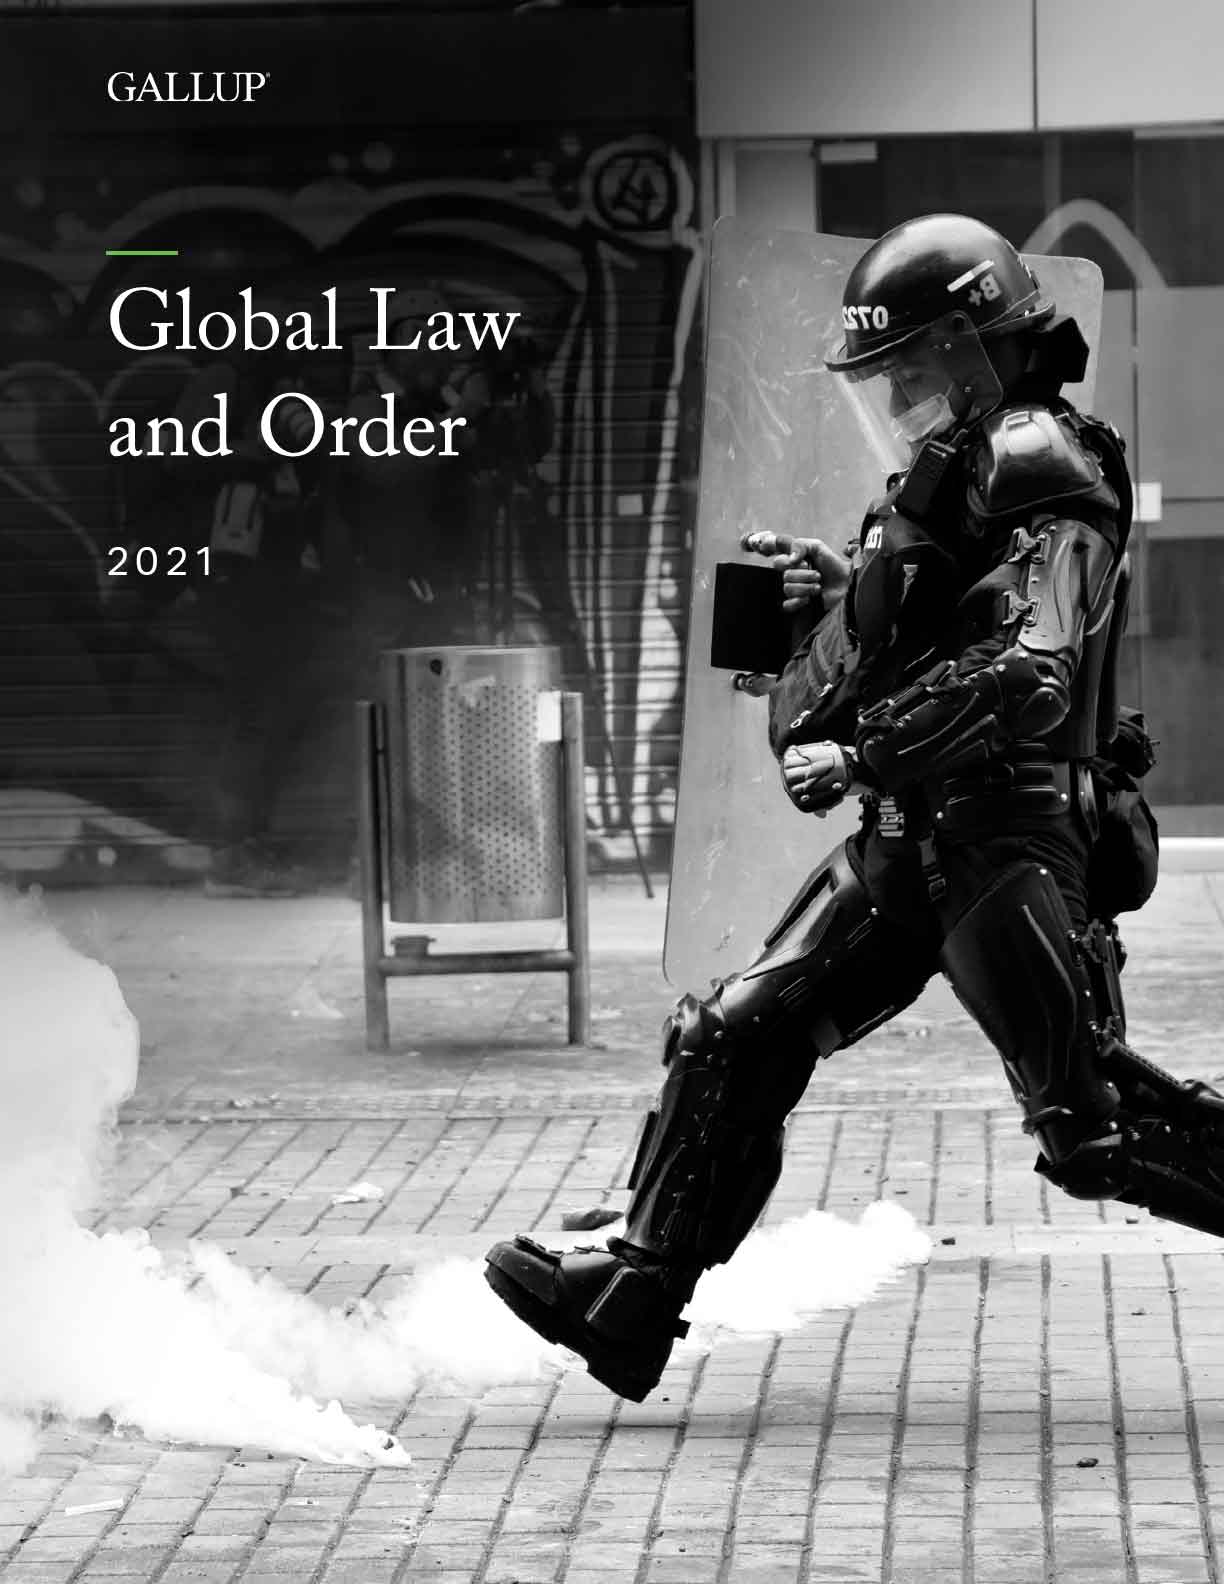 Report front cover of Gallup's Latest Global Law and Order Report.